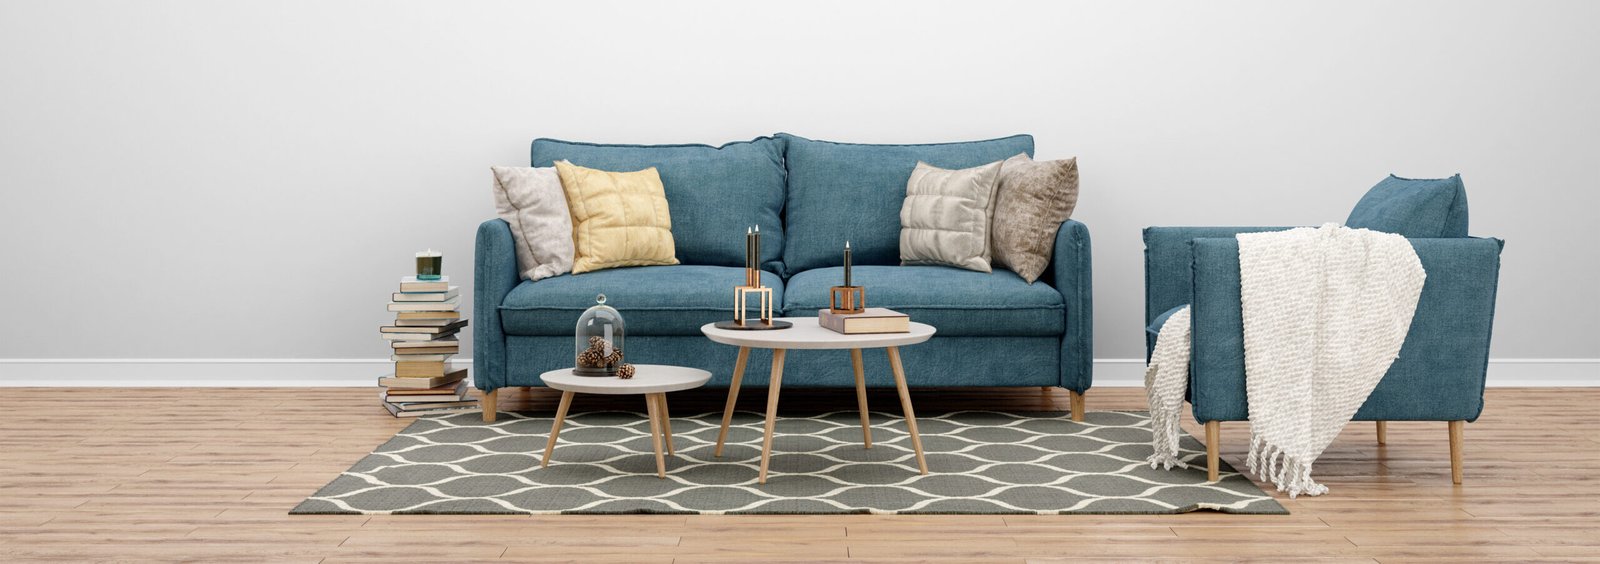 How to find the perfect sofa set for your home